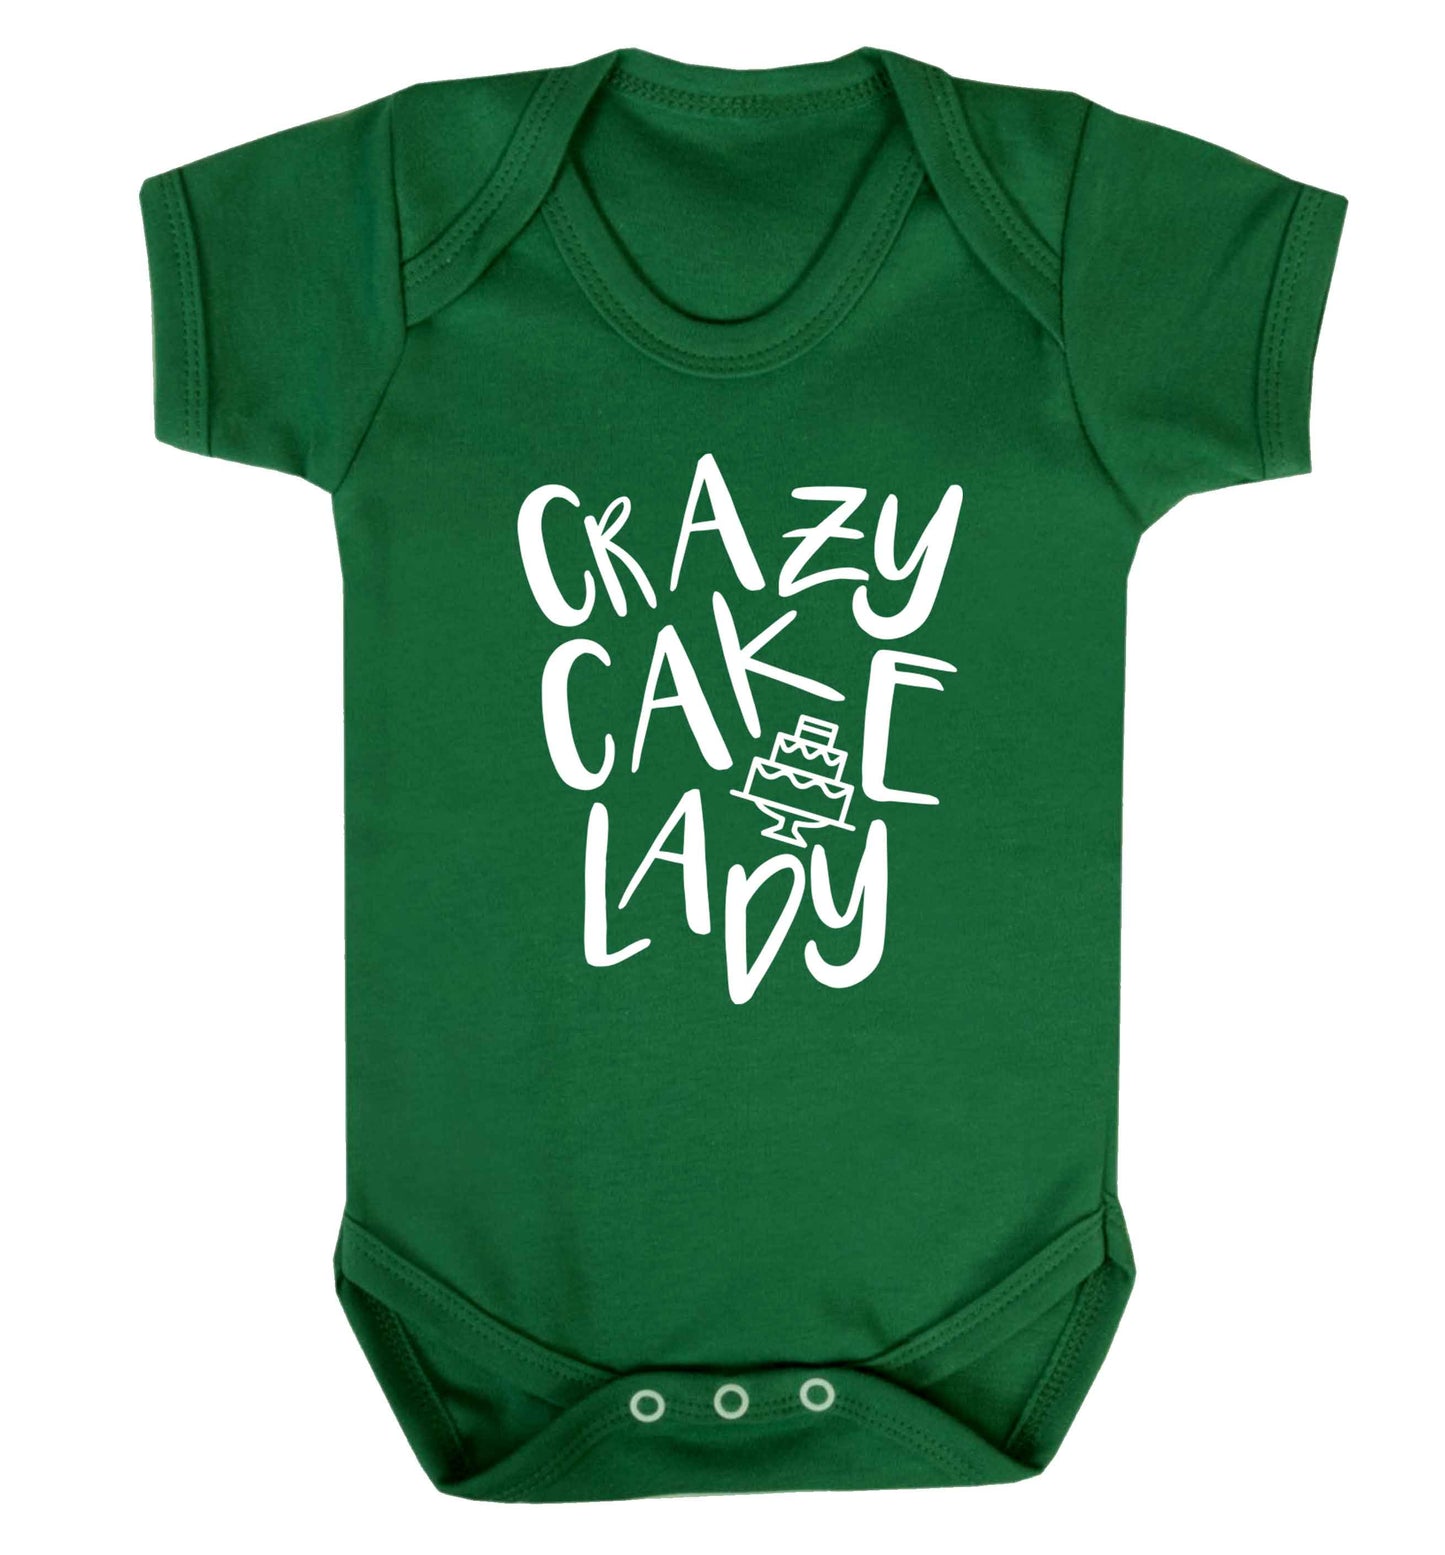 Crazy cake lady Baby Vest green 18-24 months